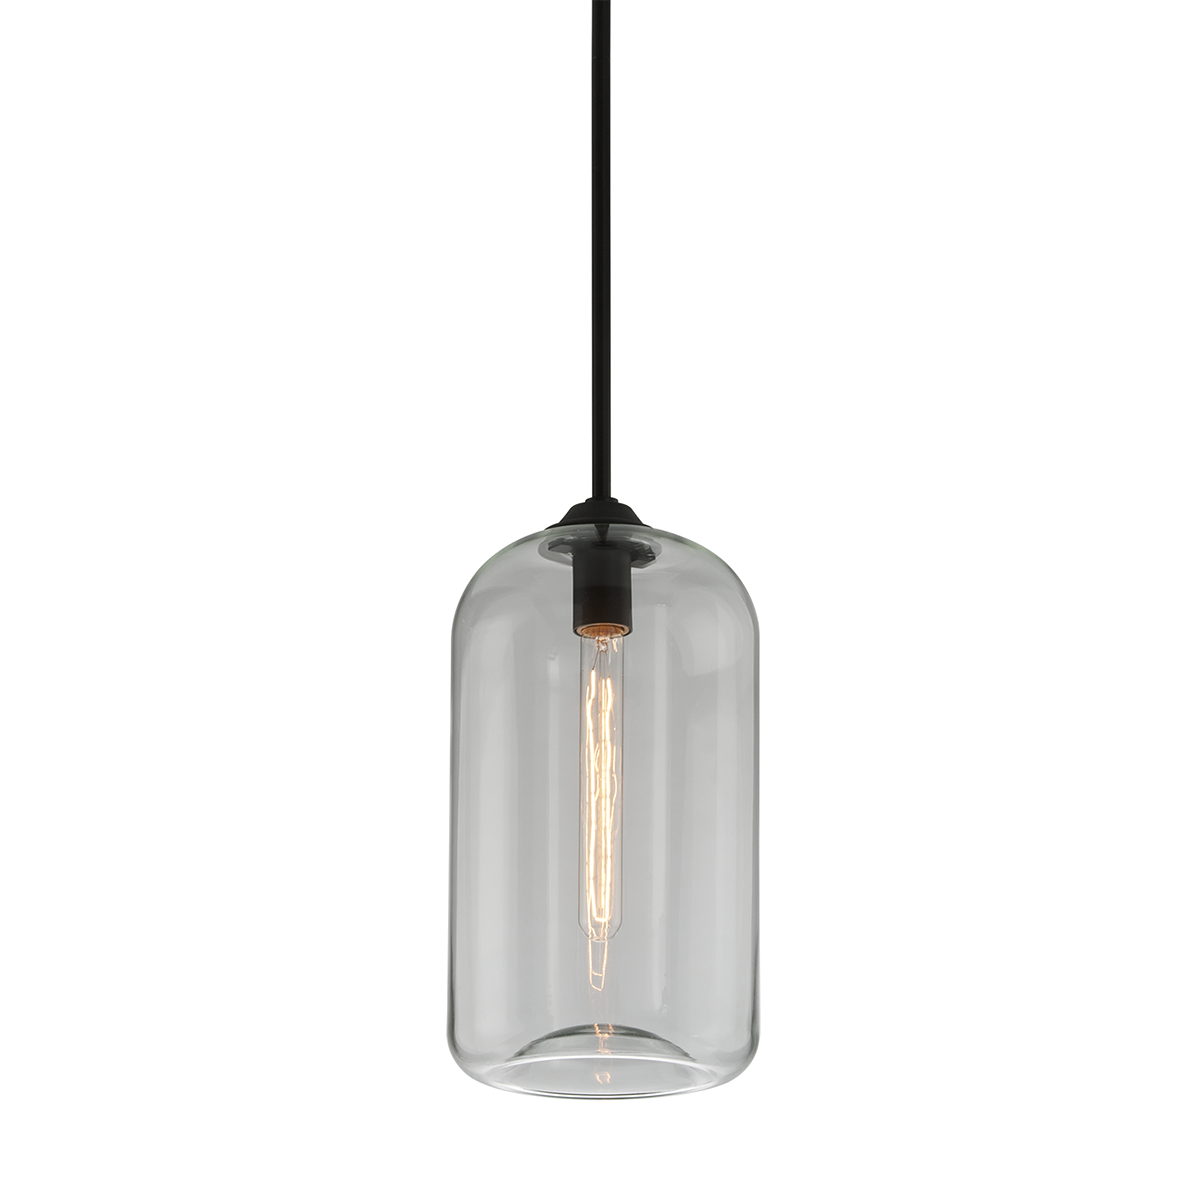 Hudson Valley Lighting District Pendant Light in Hand-Worked Iron